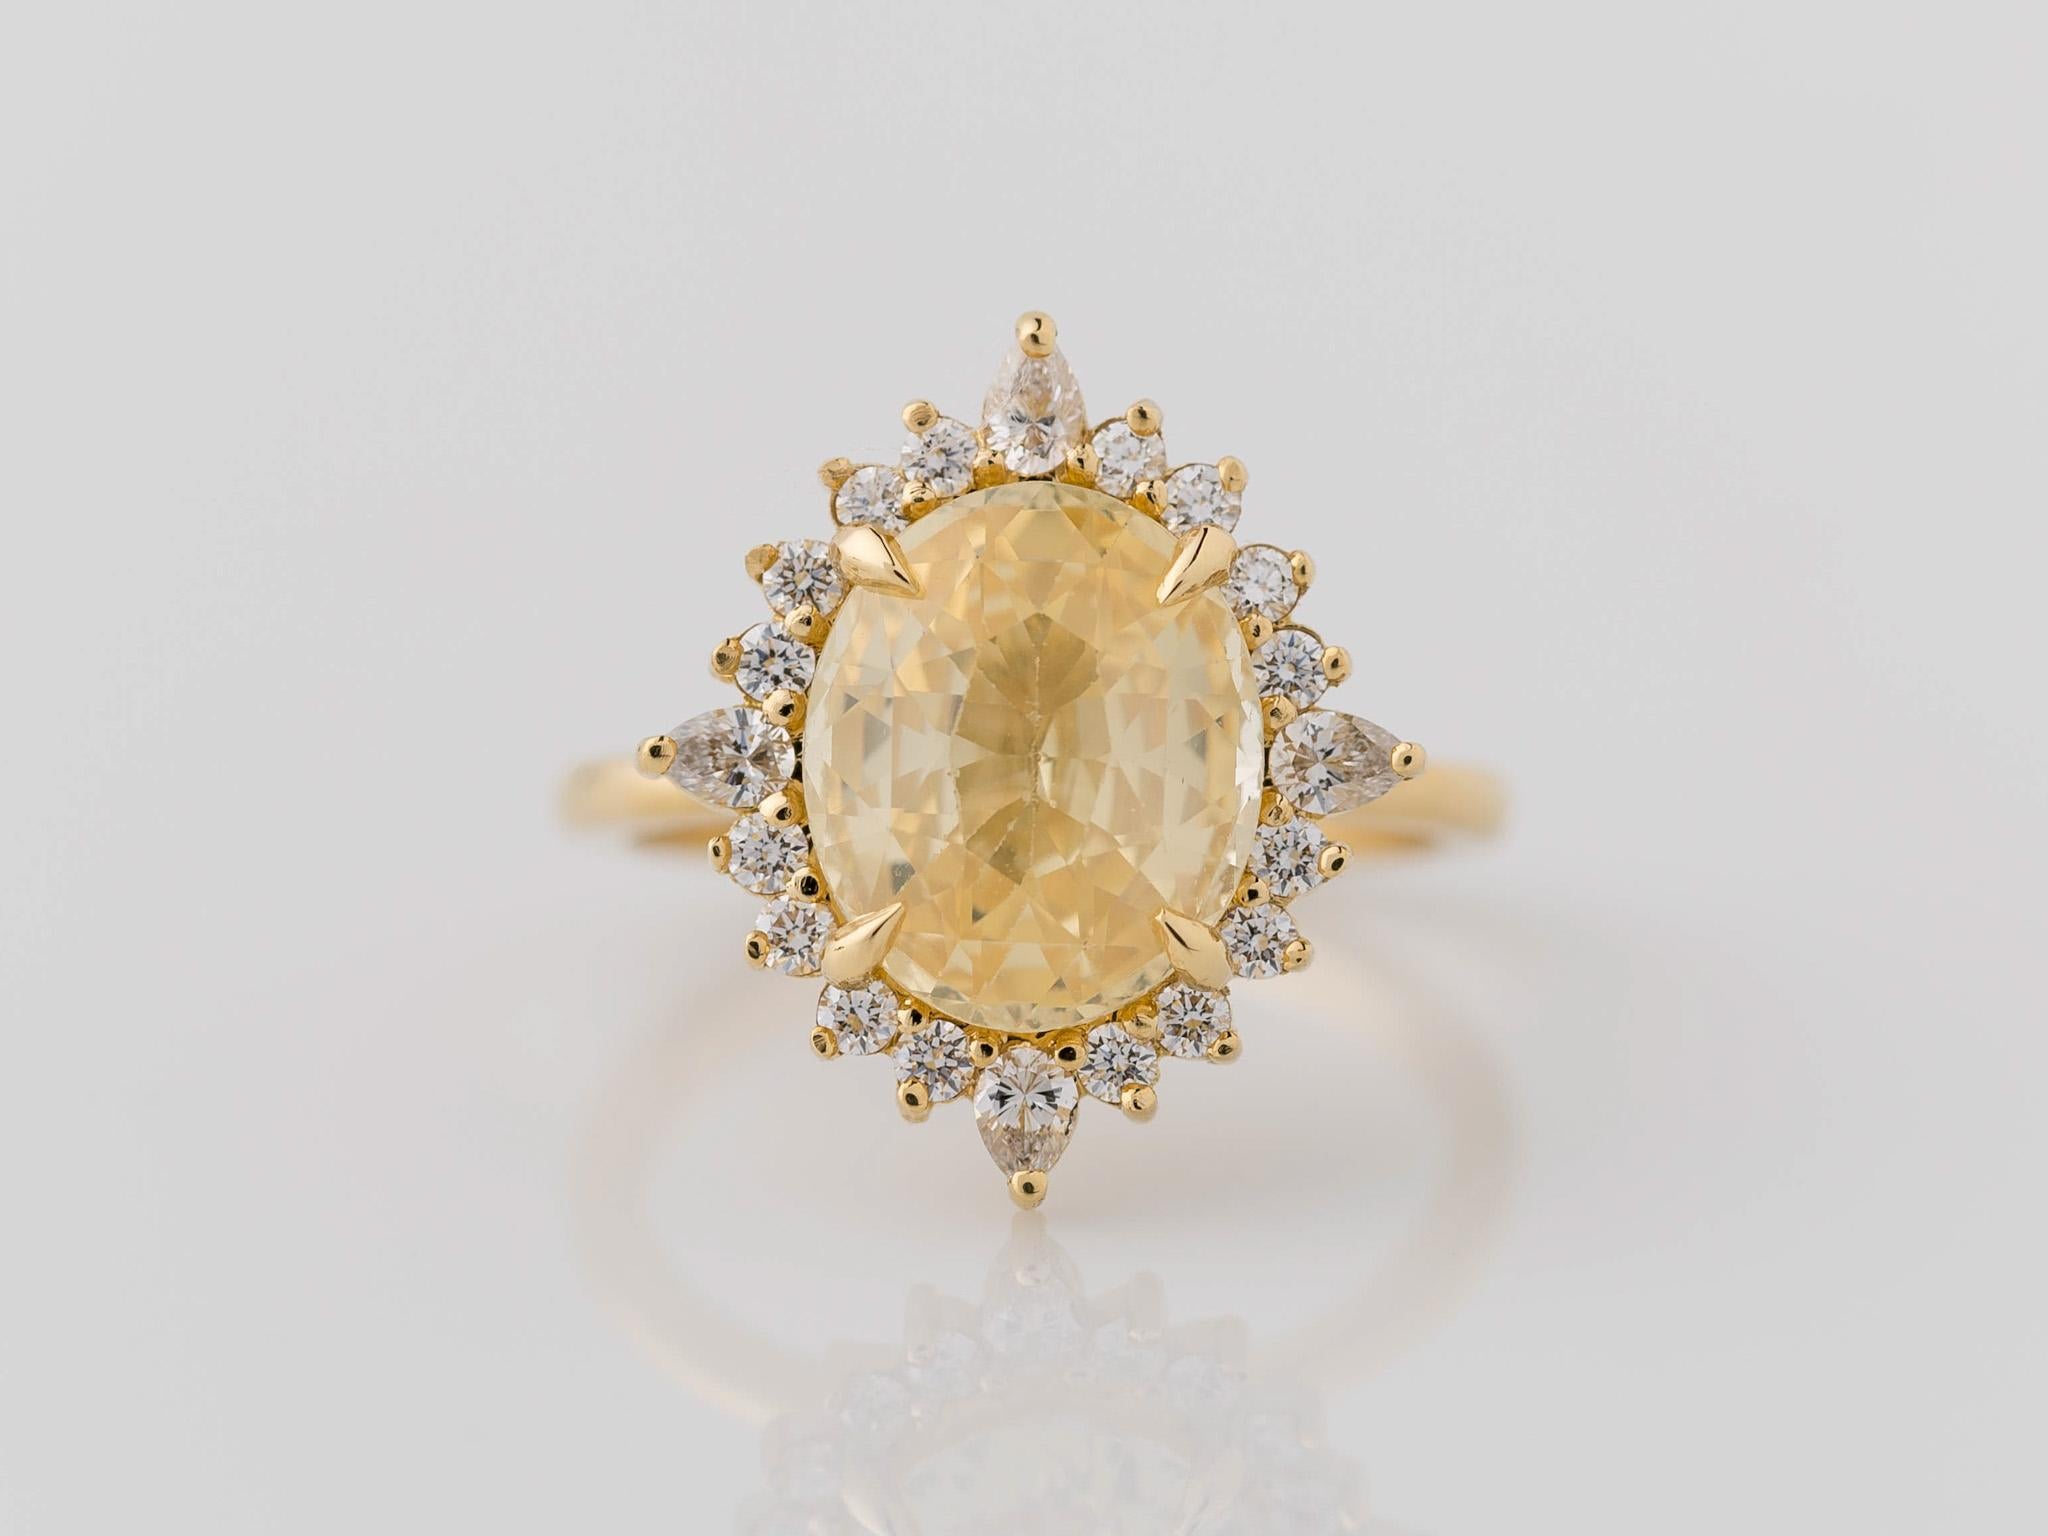 Celebrate love's brilliance with this enchanting GIA certified oval unheated/natural yellow sapphire cluster diamond engagement ring. Crafted in lustrous 18k yellow gold, the vibrant yellow sapphire commands attention, surrounded by a mesmerizing